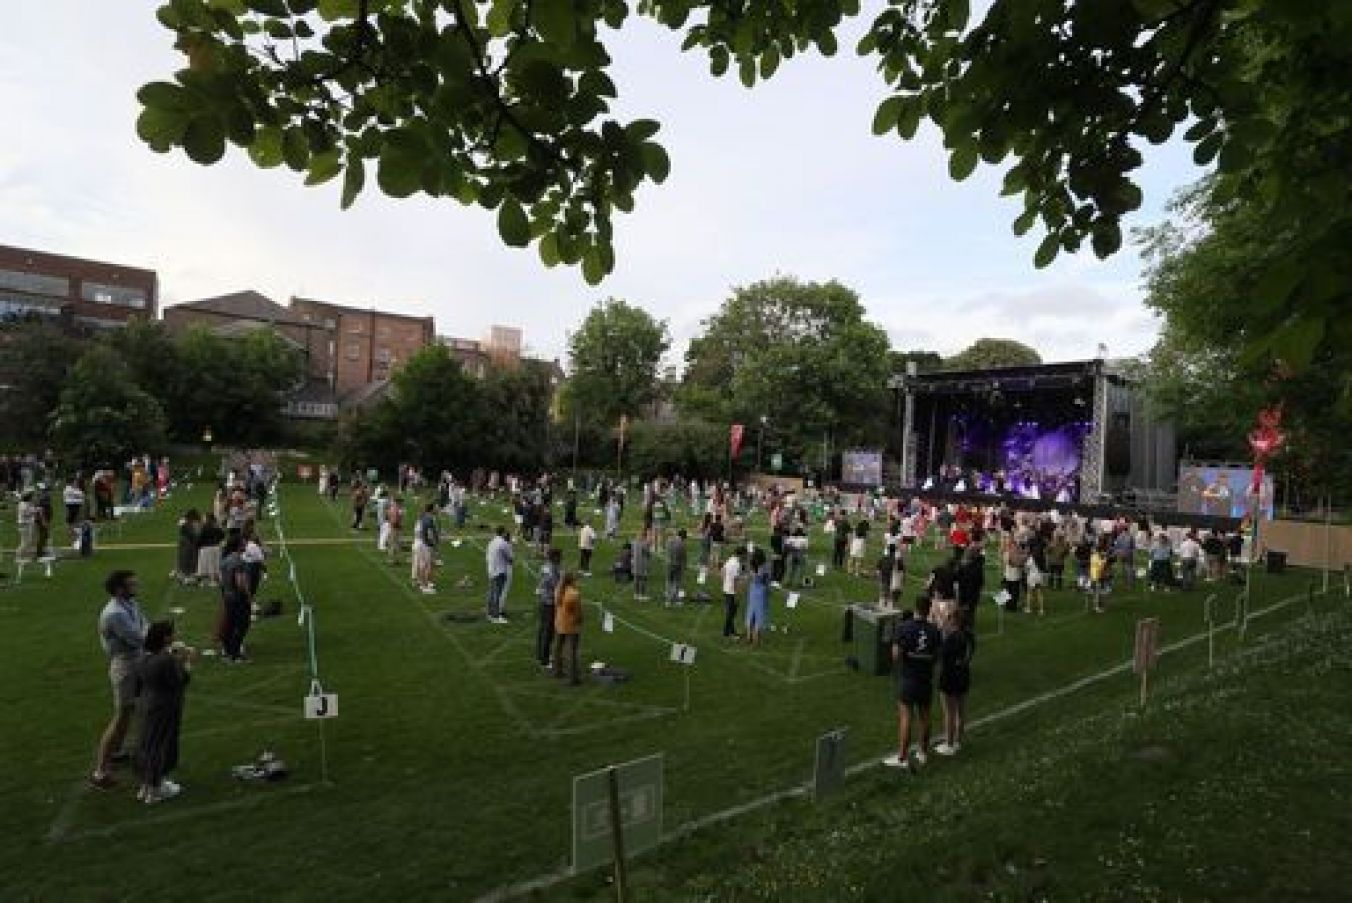 People Watch James Vincent Mcmorrow On Stage At Iveagh Gardens In Dublin On June 10Th. The Event Was The Republic's First Major Live Gig Since The Onset Of The Pandemic. Photo: Pa